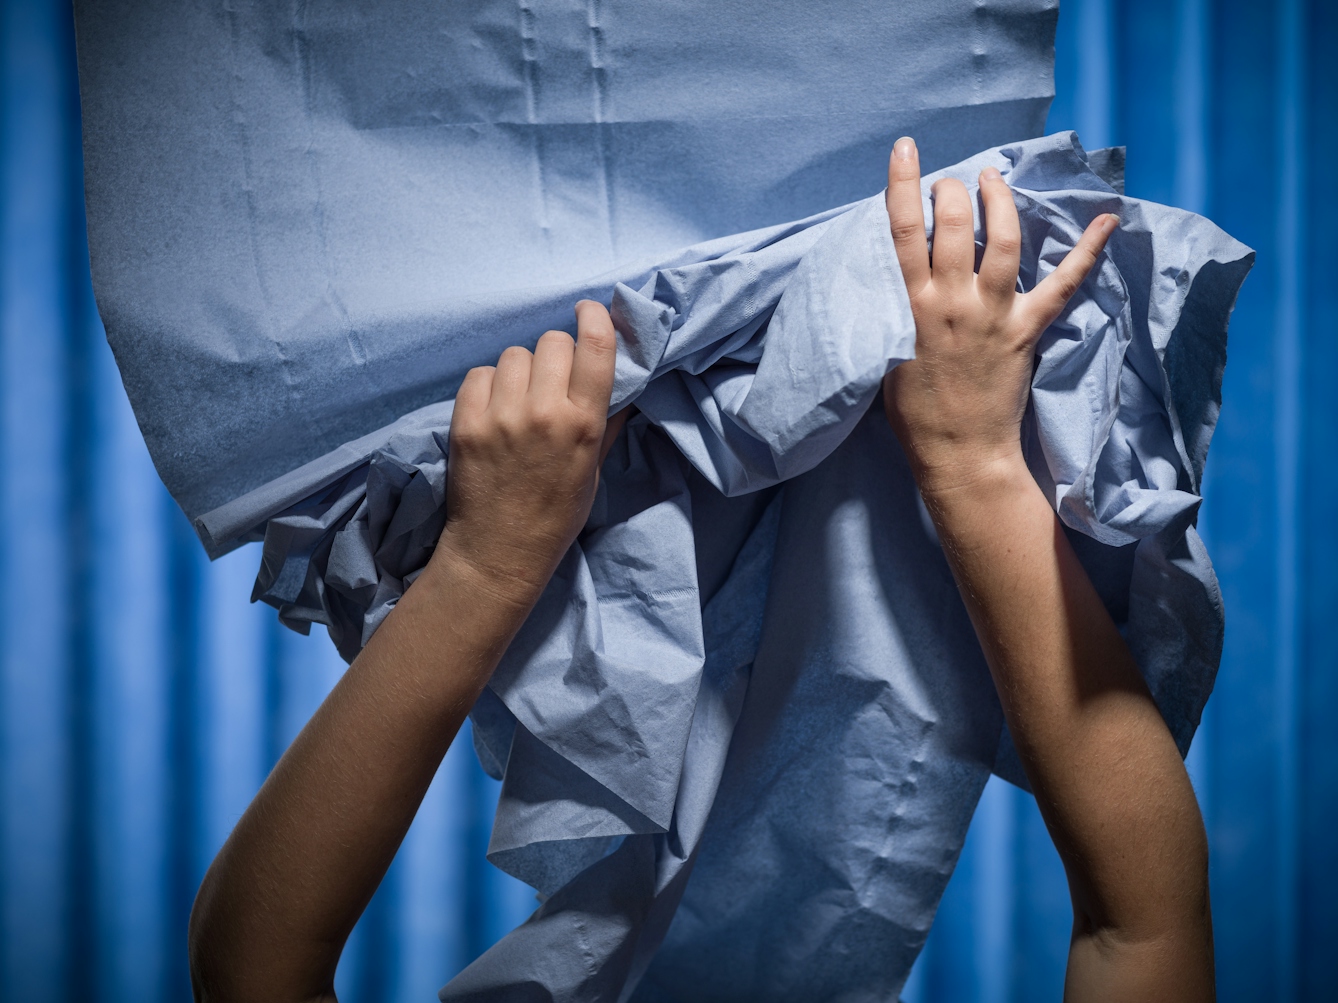 Photograph of a pair of hands struggling to contain a ream of medical blue examination couch paper. Photographed against a background of blue antibacterial clinical curtains.